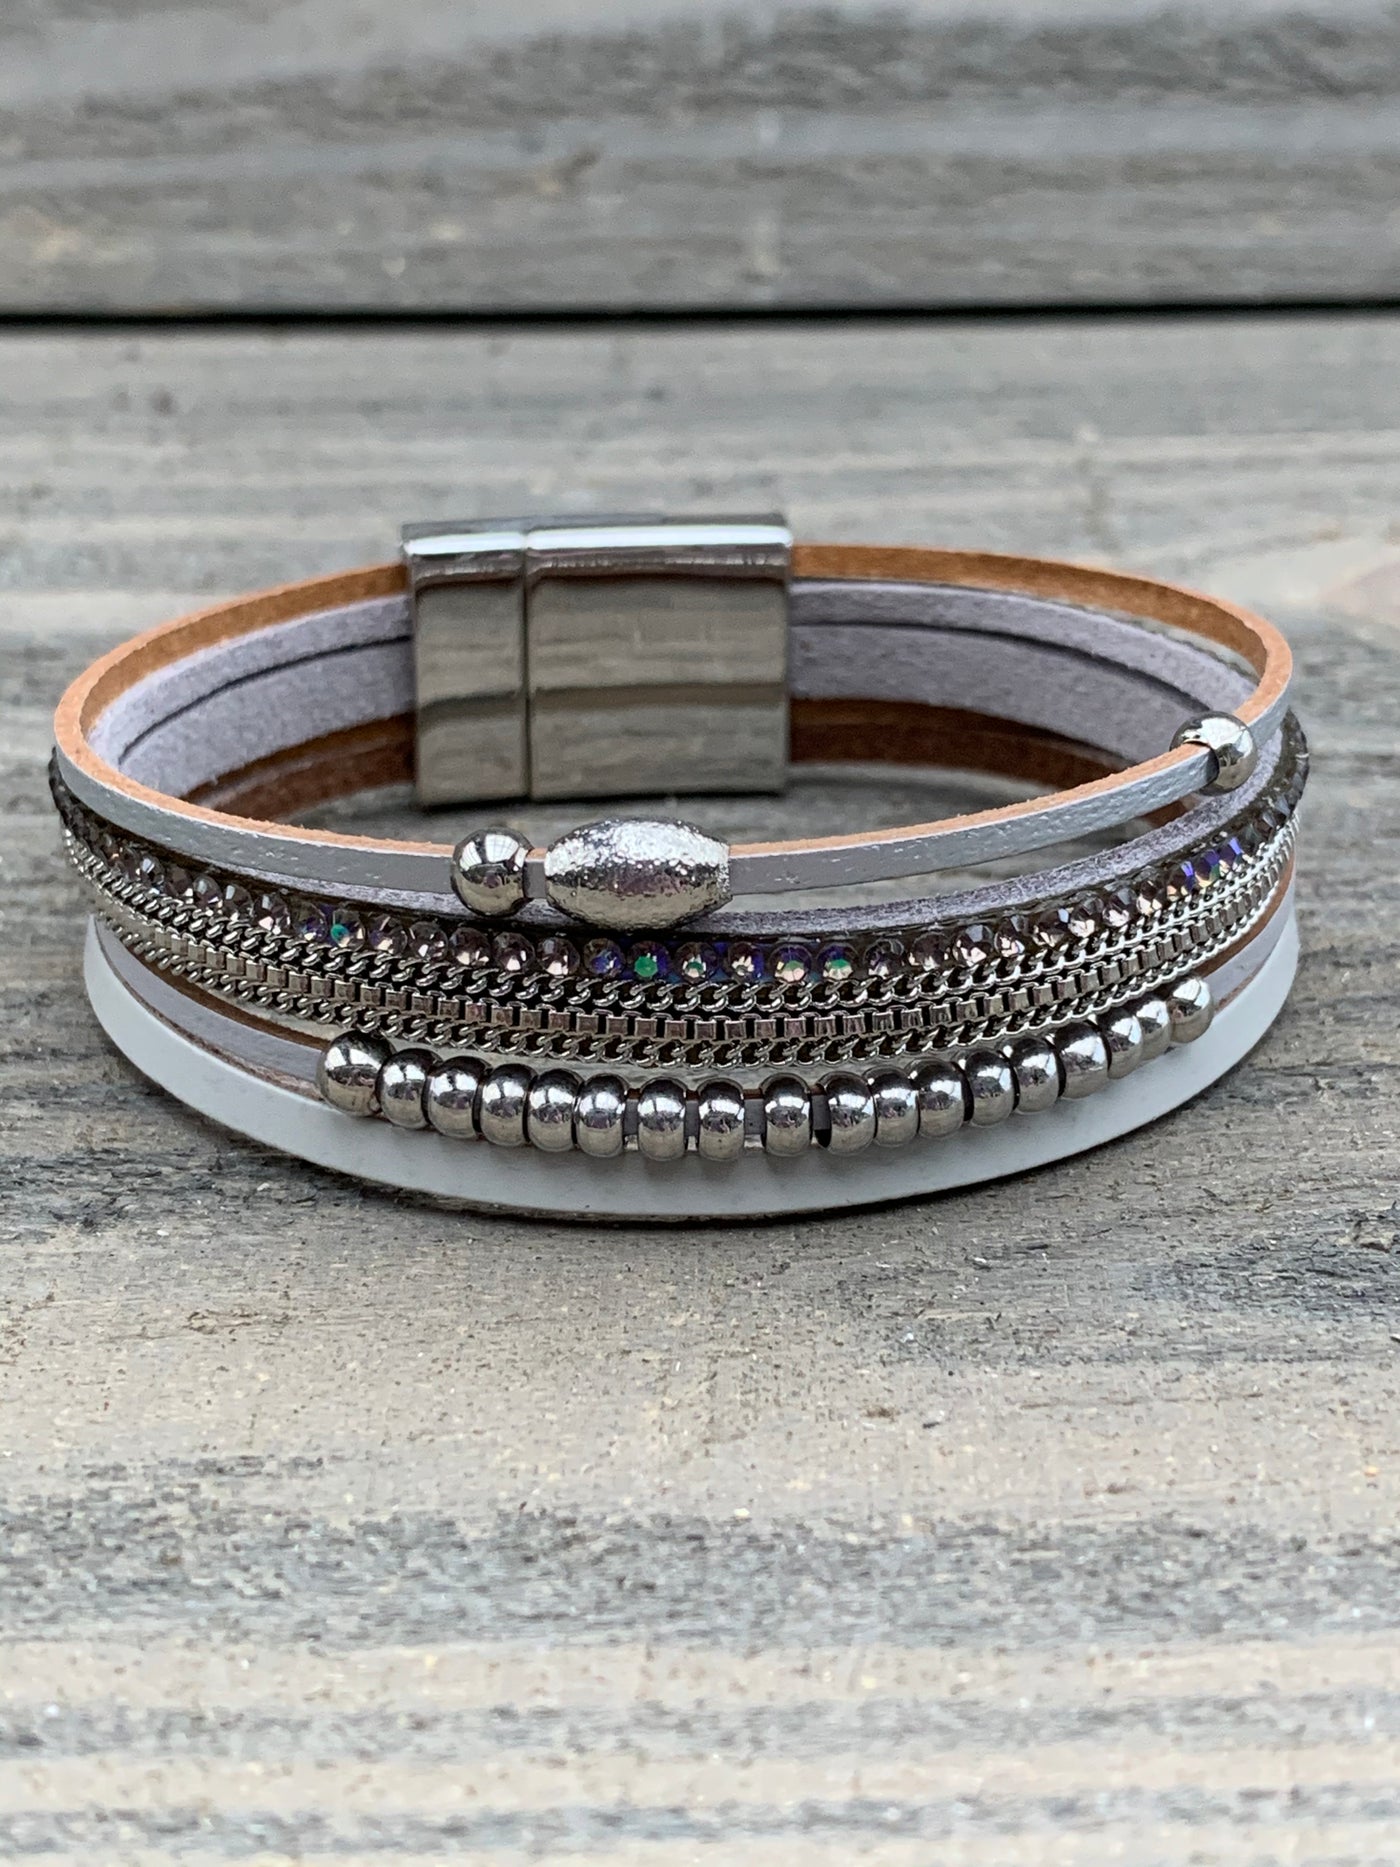 Grey and Silver Iridescent Rhinestone Magnetic Bracelet - Jill's Jewels | Unique, Handcrafted, Trendy, And Fun Jewelry